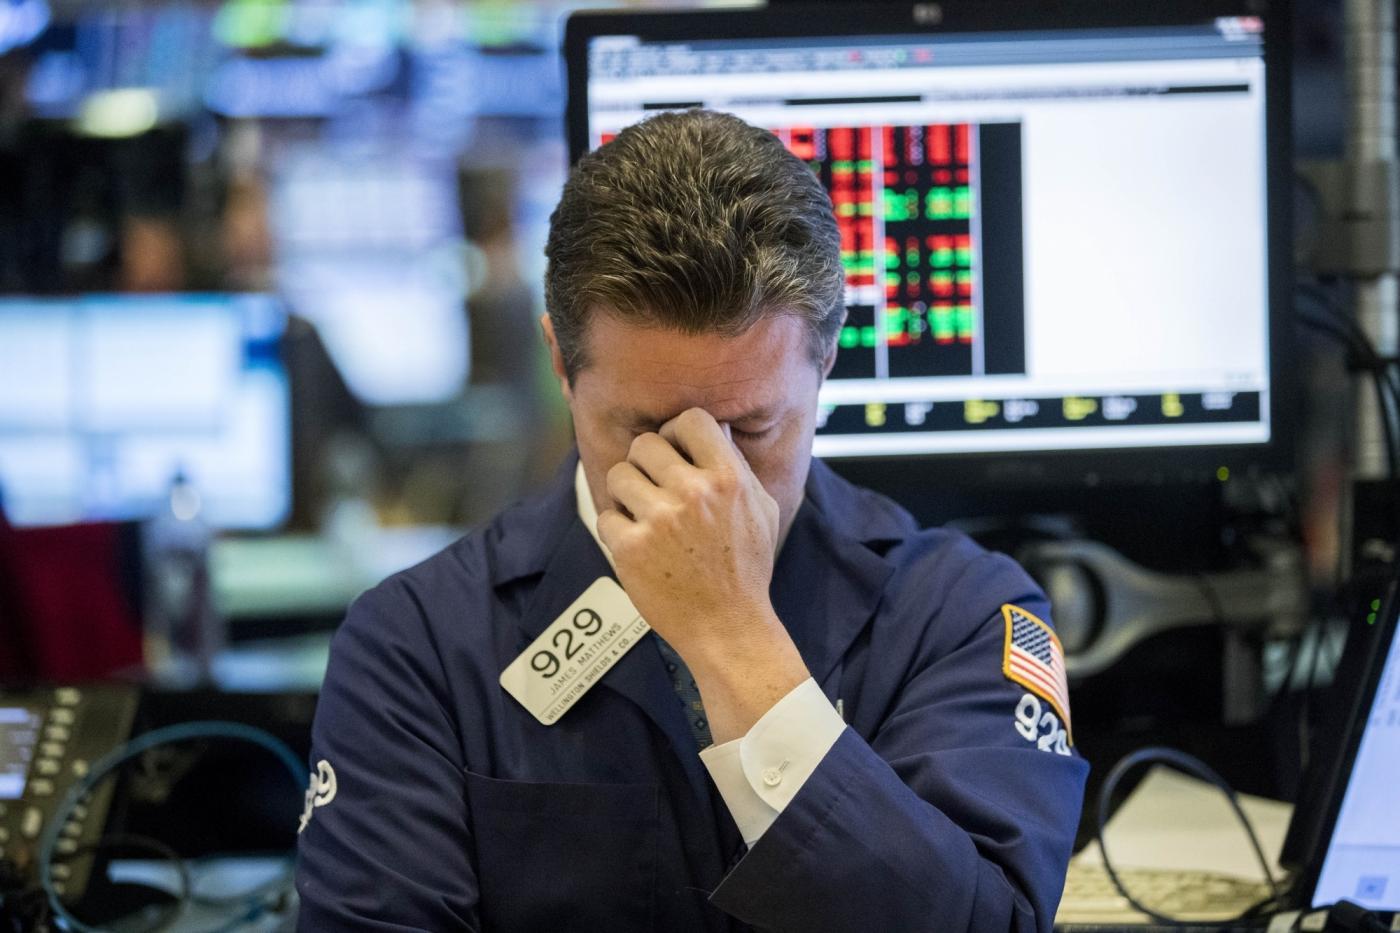 NEW YORK, Oct. 11, 2018 (Xinhua) -- A trader reacts at the New York Stock Exchange in New York, the United States, on Oct. 11, 2018. U.S. stocks extended deep losses in volatile trading on Thursday. The Dow Jones Industrial Average fell 545.91 points, or 2.13 percent, to 25,052.83. The S&P 500 was down 57.31 points, or 2.06 percent, to 2,728.37. The Nasdaq Composite Index was down 92.99 points, or 1.25 percent, to 7,329.06. (Xinhua/Wang Ying/IANS) by .